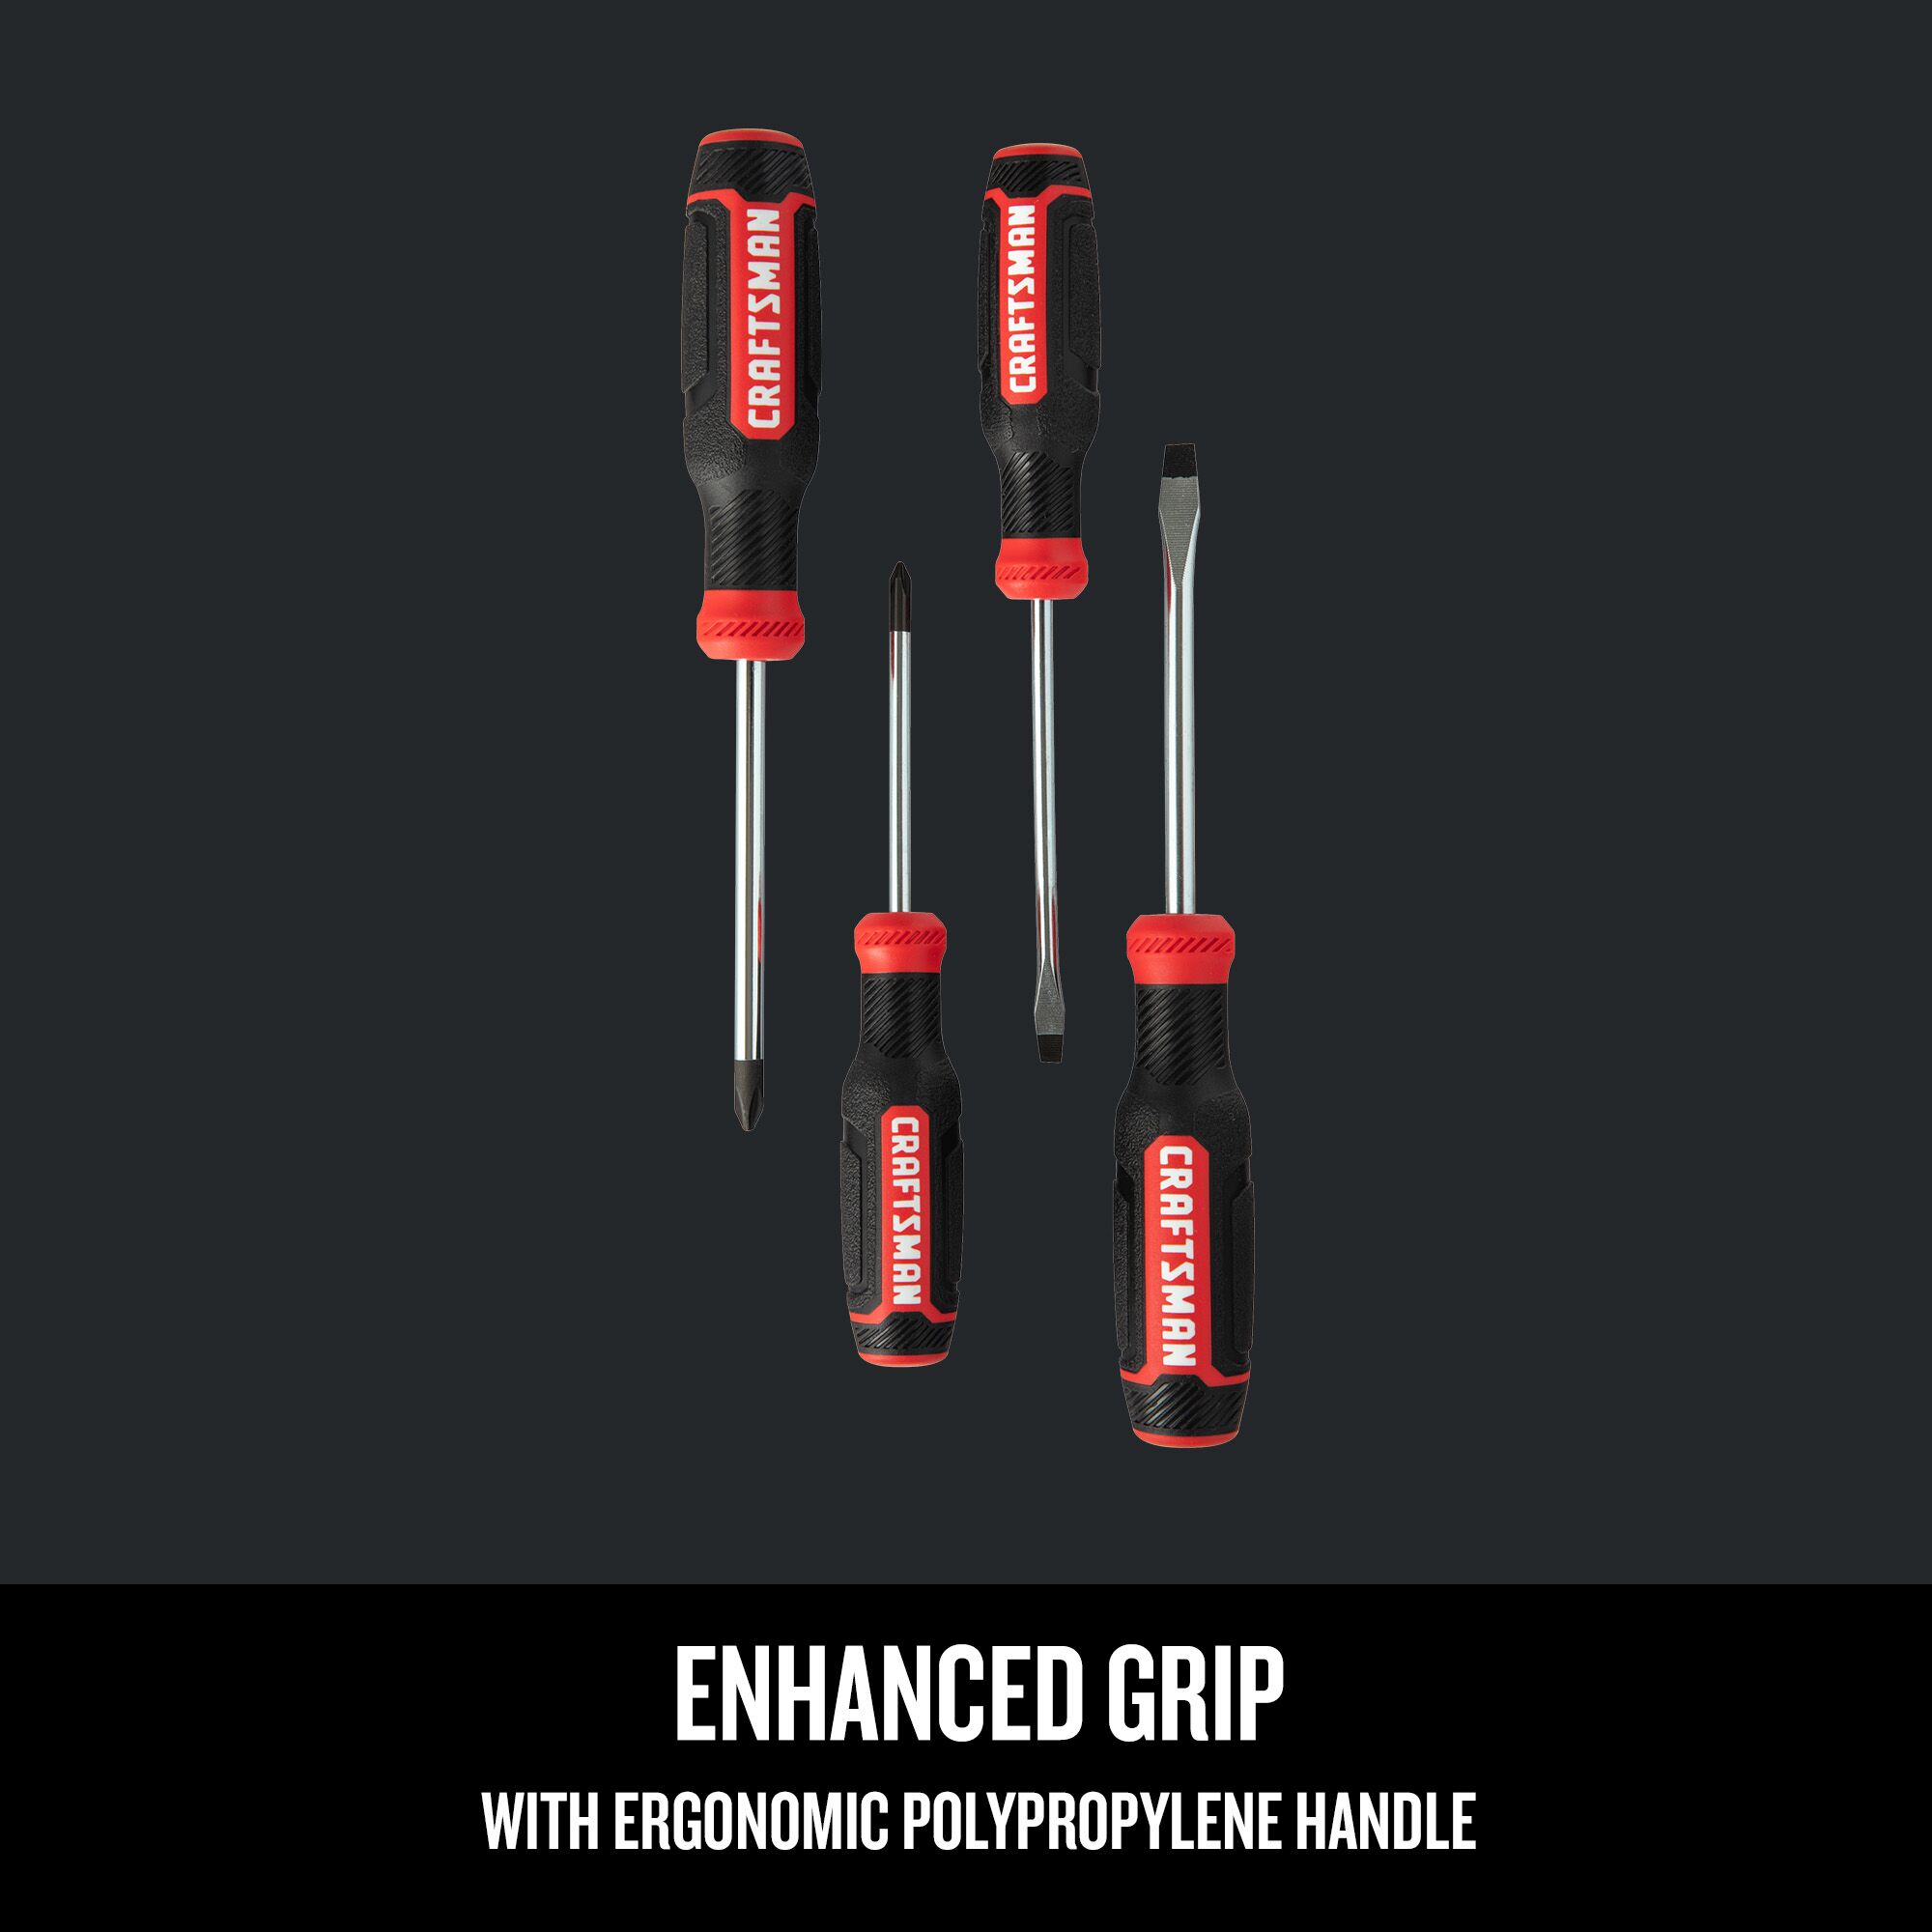 Graphic of CRAFTSMAN Screwdrivers: Bi-Material highlighting product features